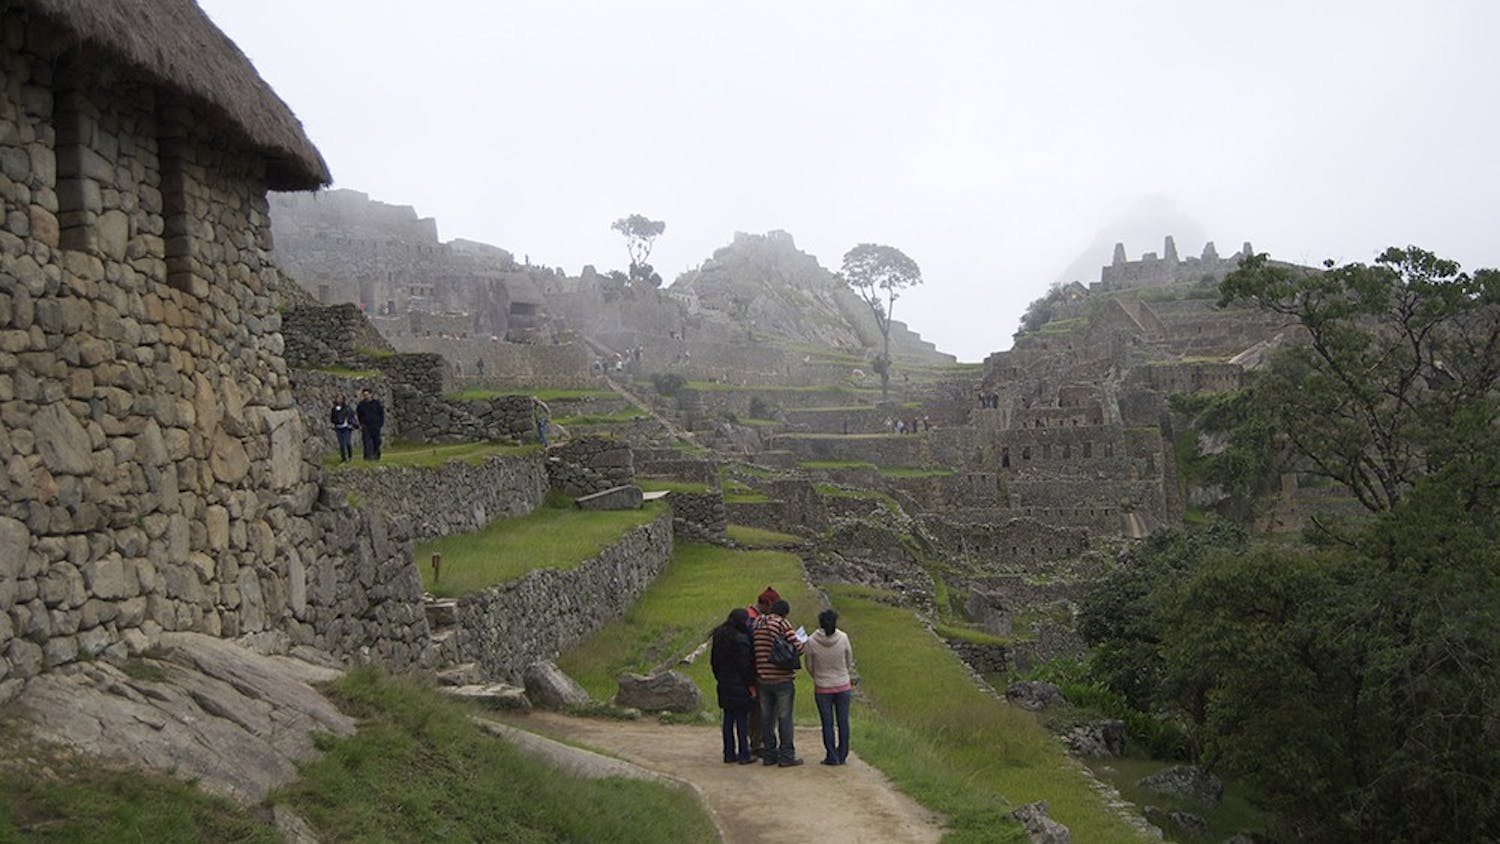 Visitors are allowed to walk around inside of Machu Picchu, where people can view the Sun Temple, agriculture fields, and other important aspects of Incan life while they lived in Machu Picchu.